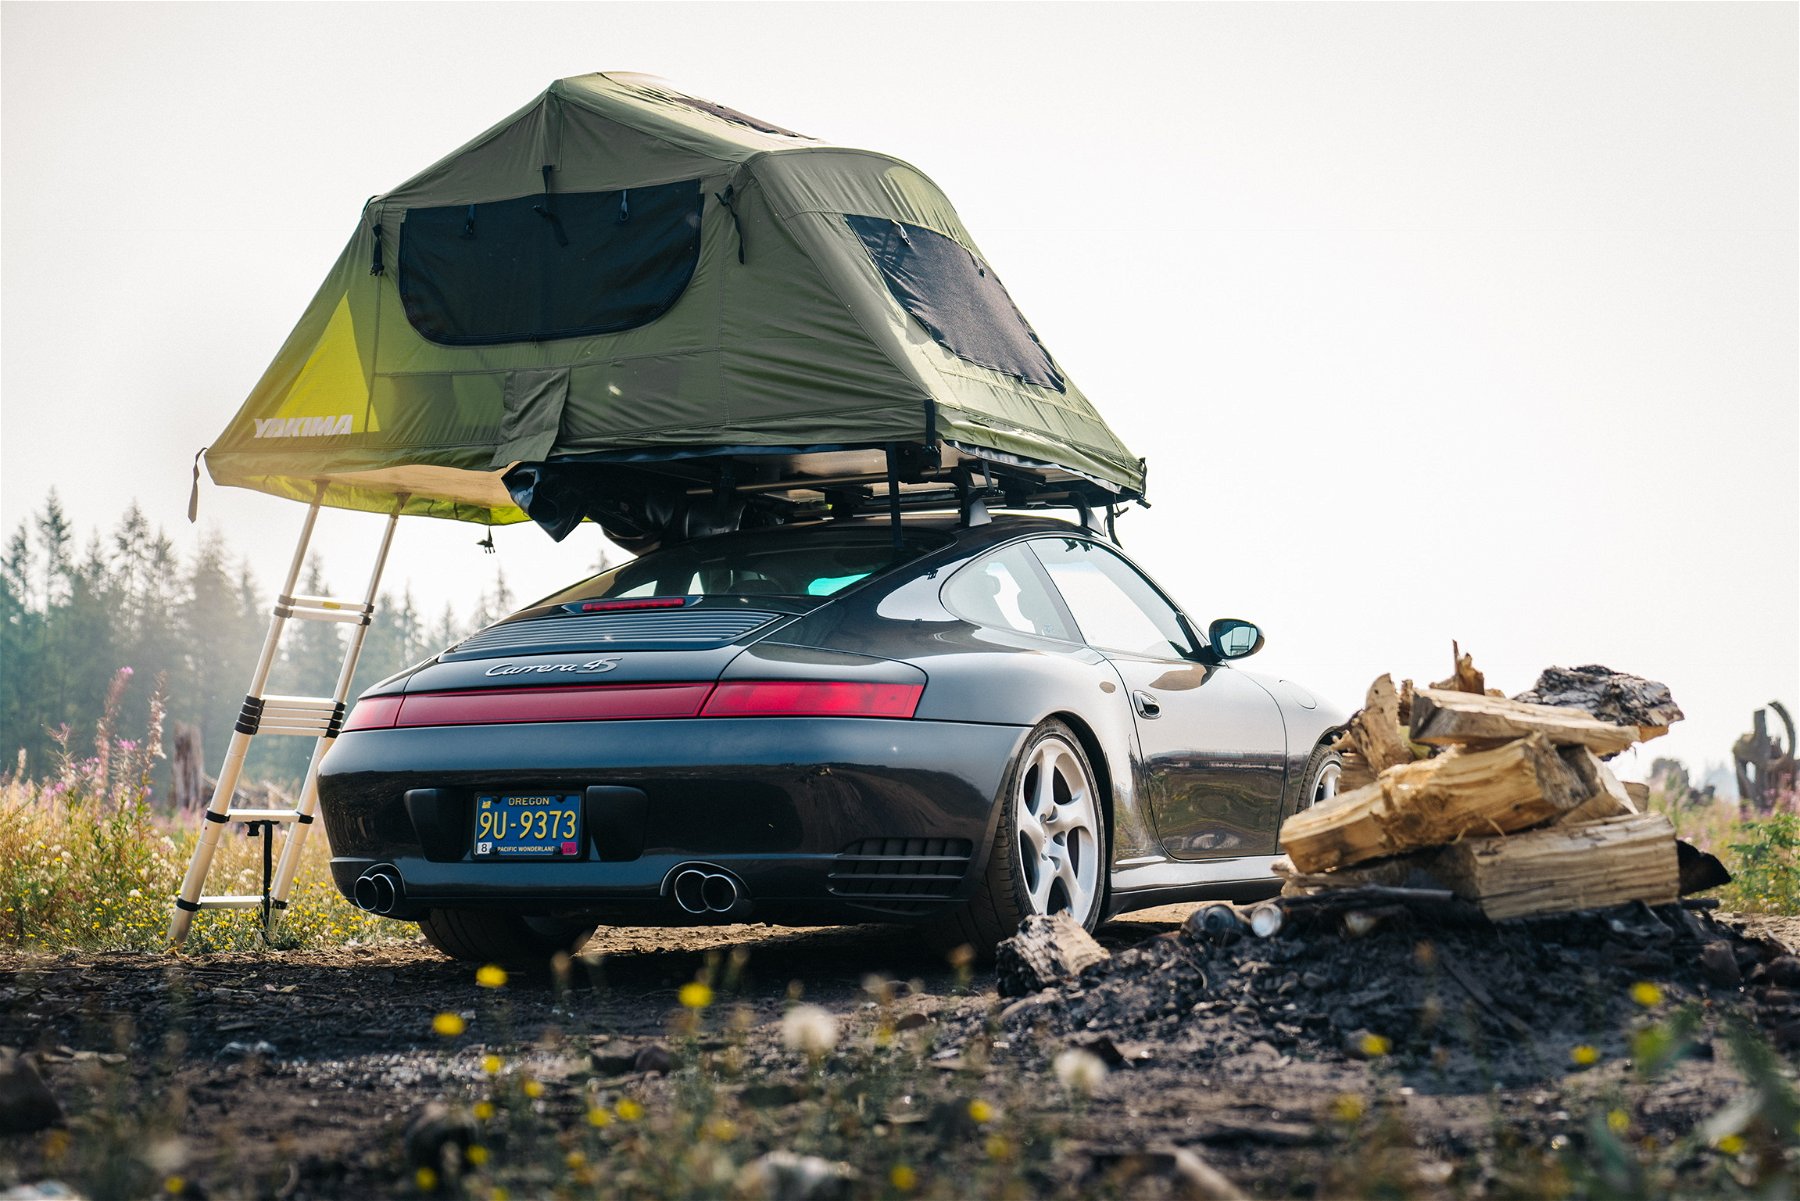 There are no excuses. Get out and do a Porsche 911 road trip!